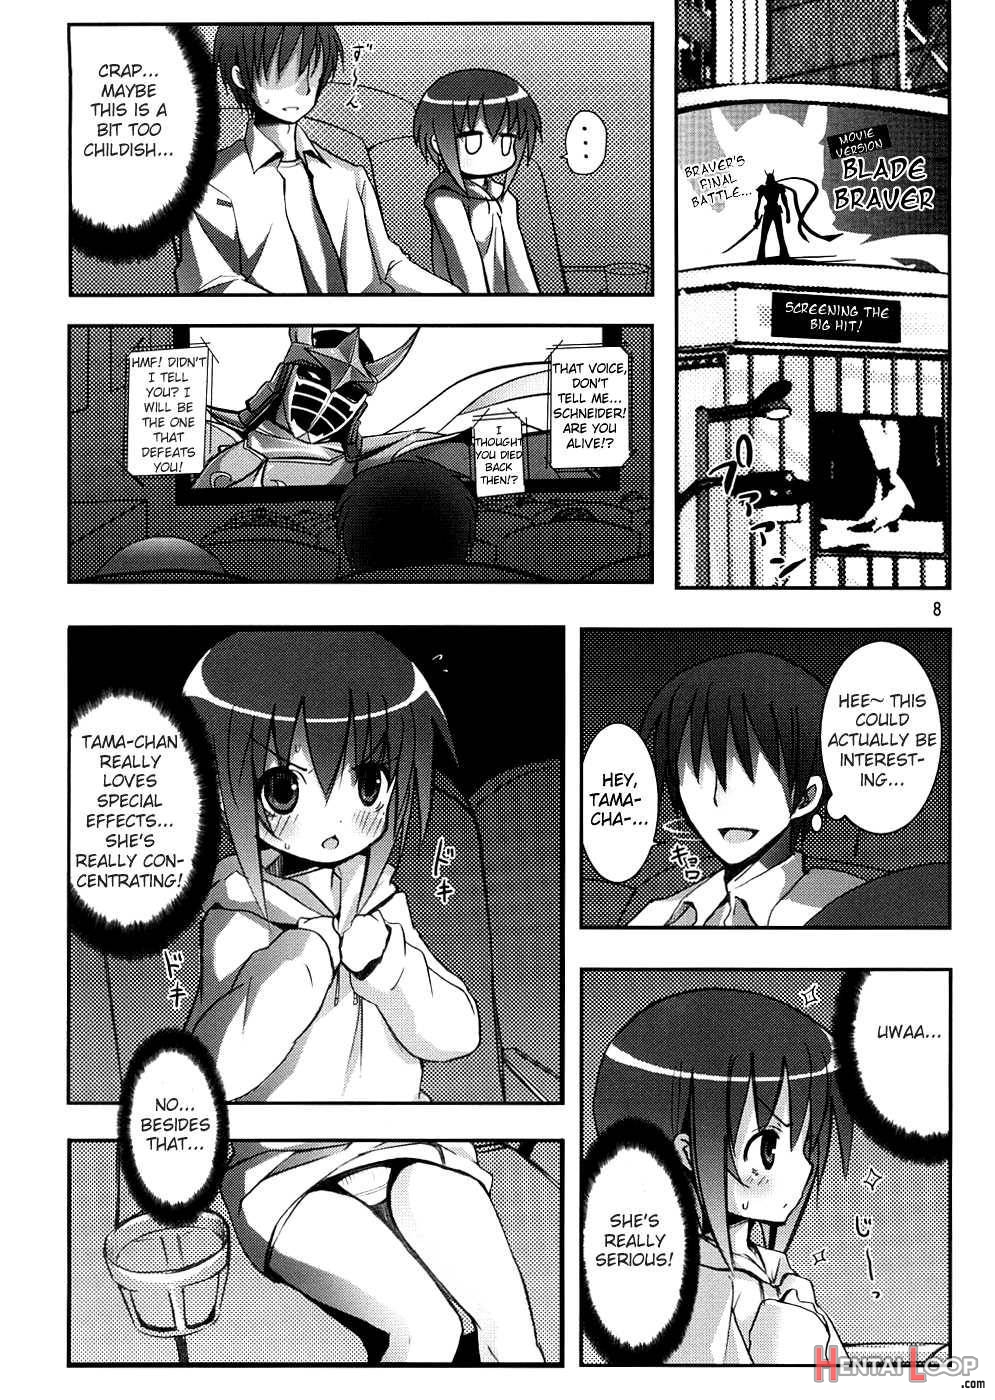 Tama-chan to Date page 4